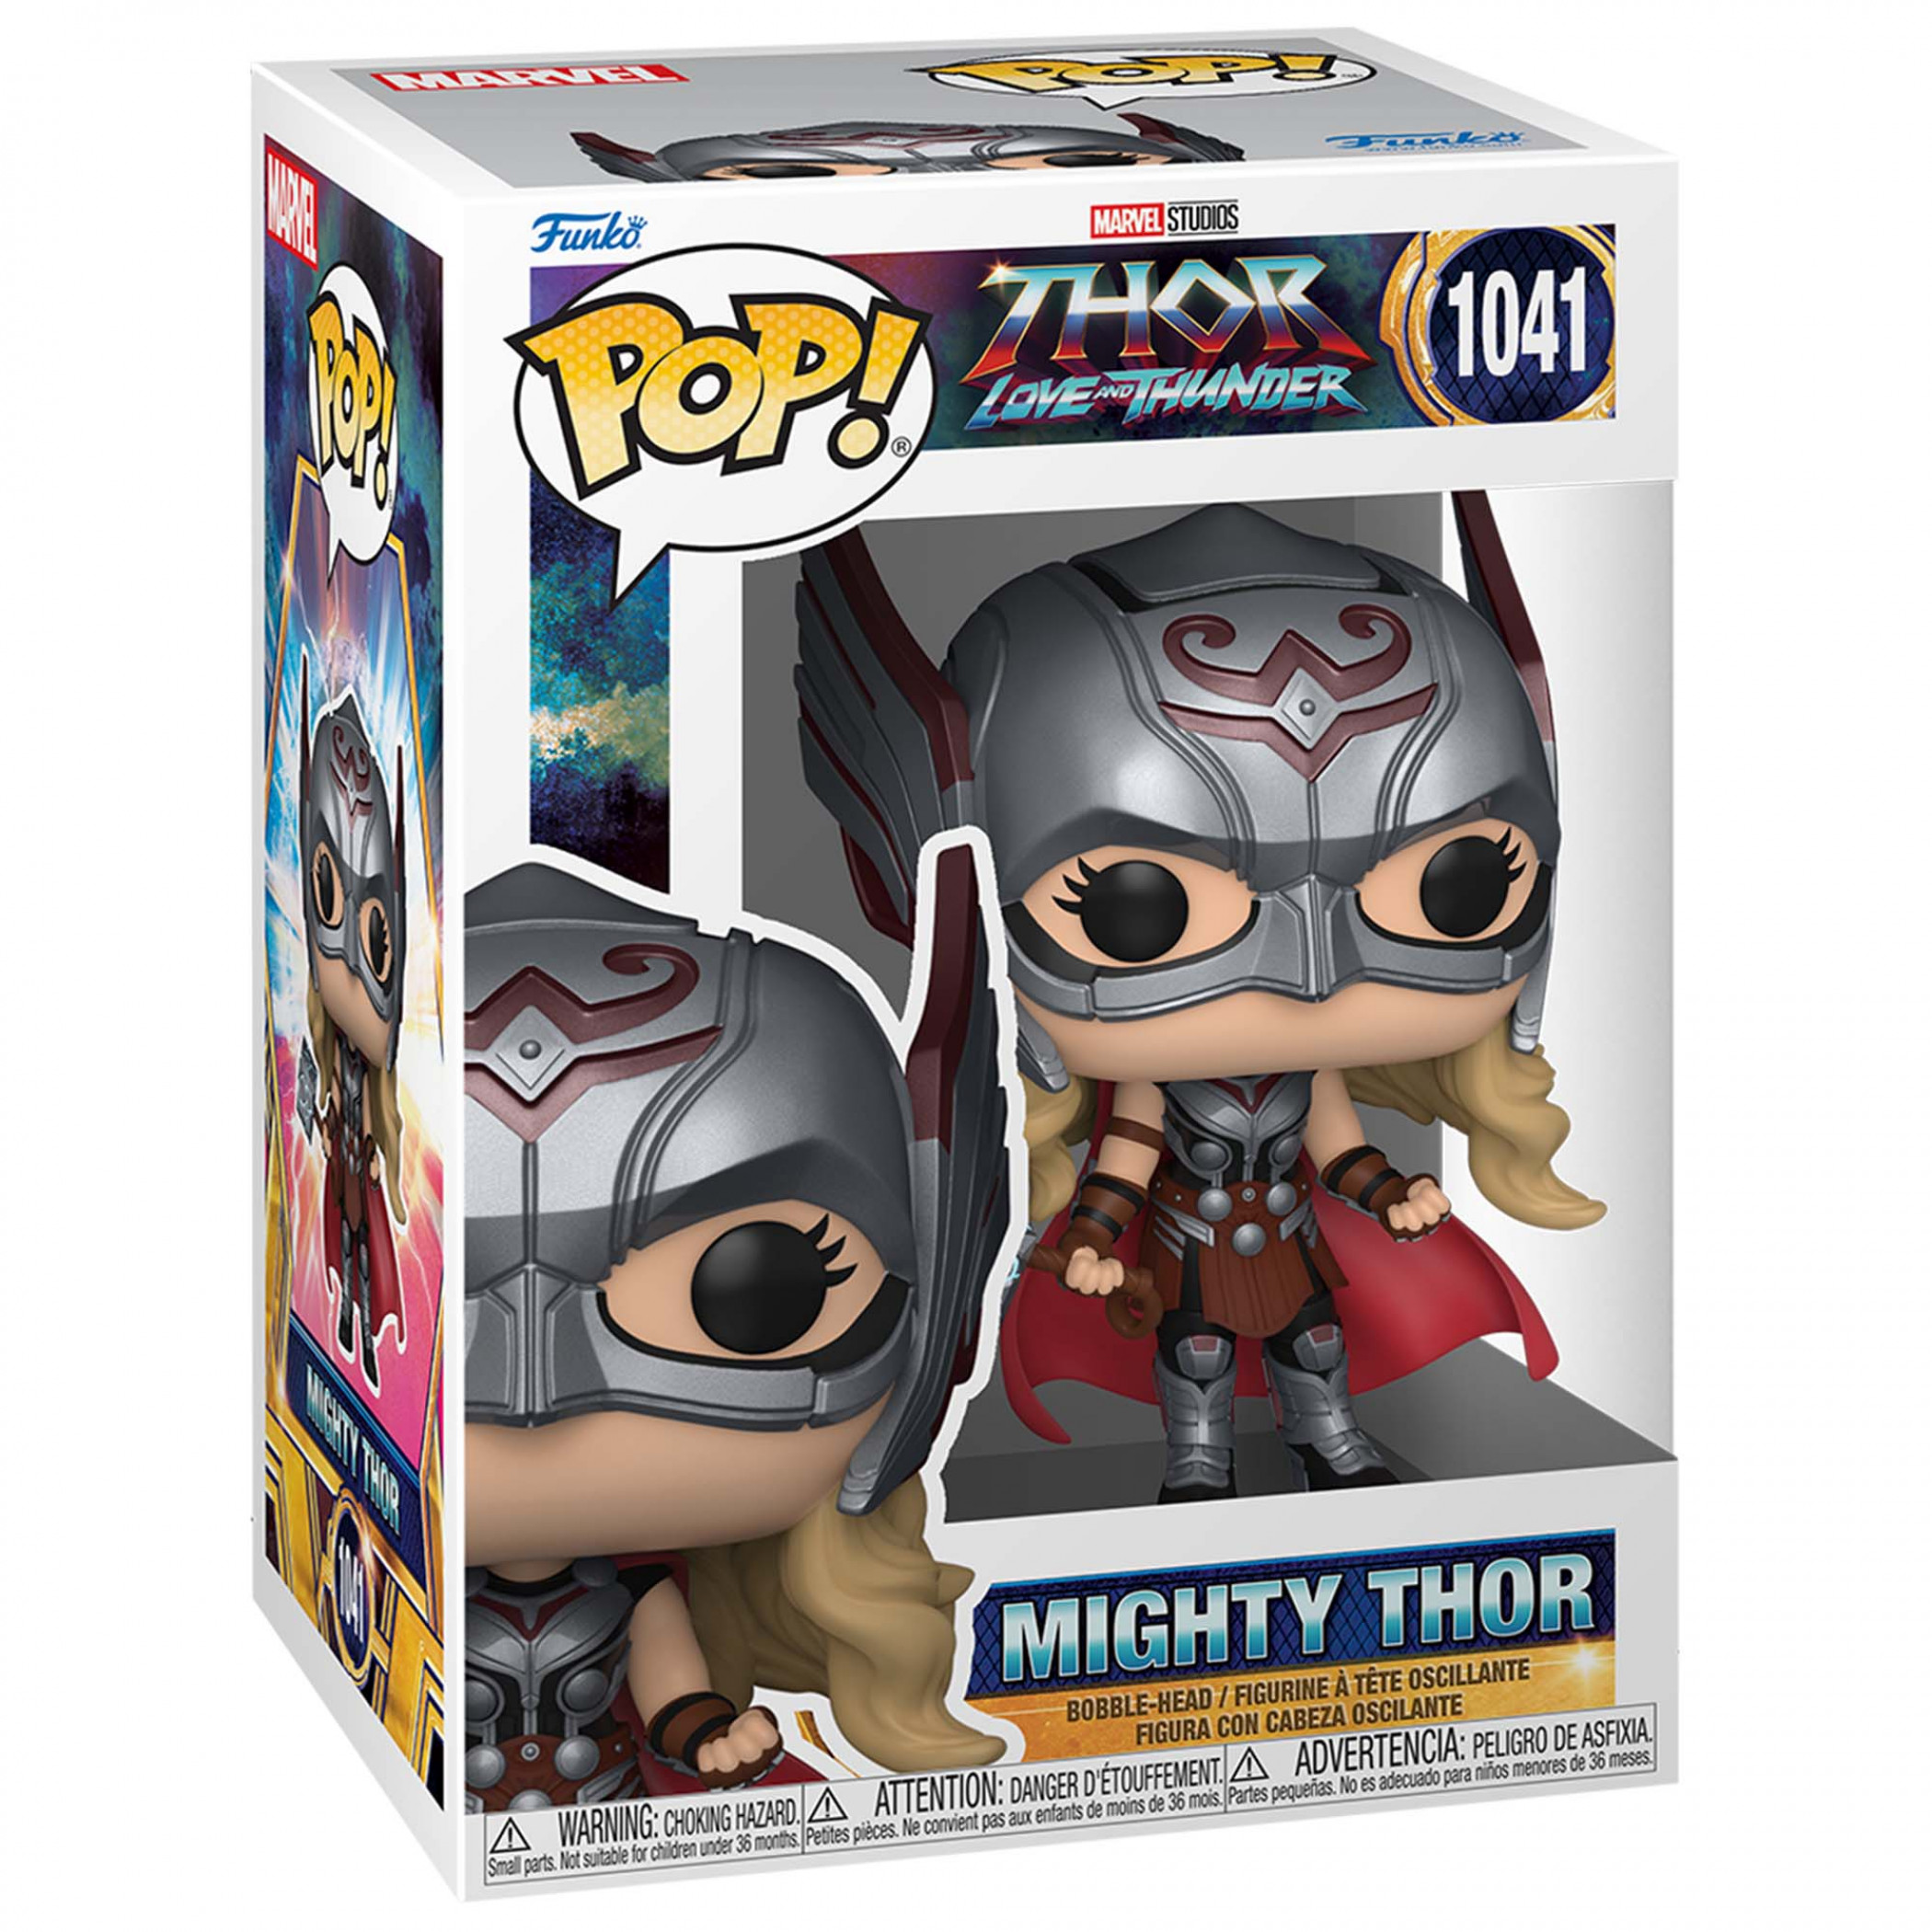 Thor Love and Thunder The Mighty Thor Funko Pop! Vinyl Figure